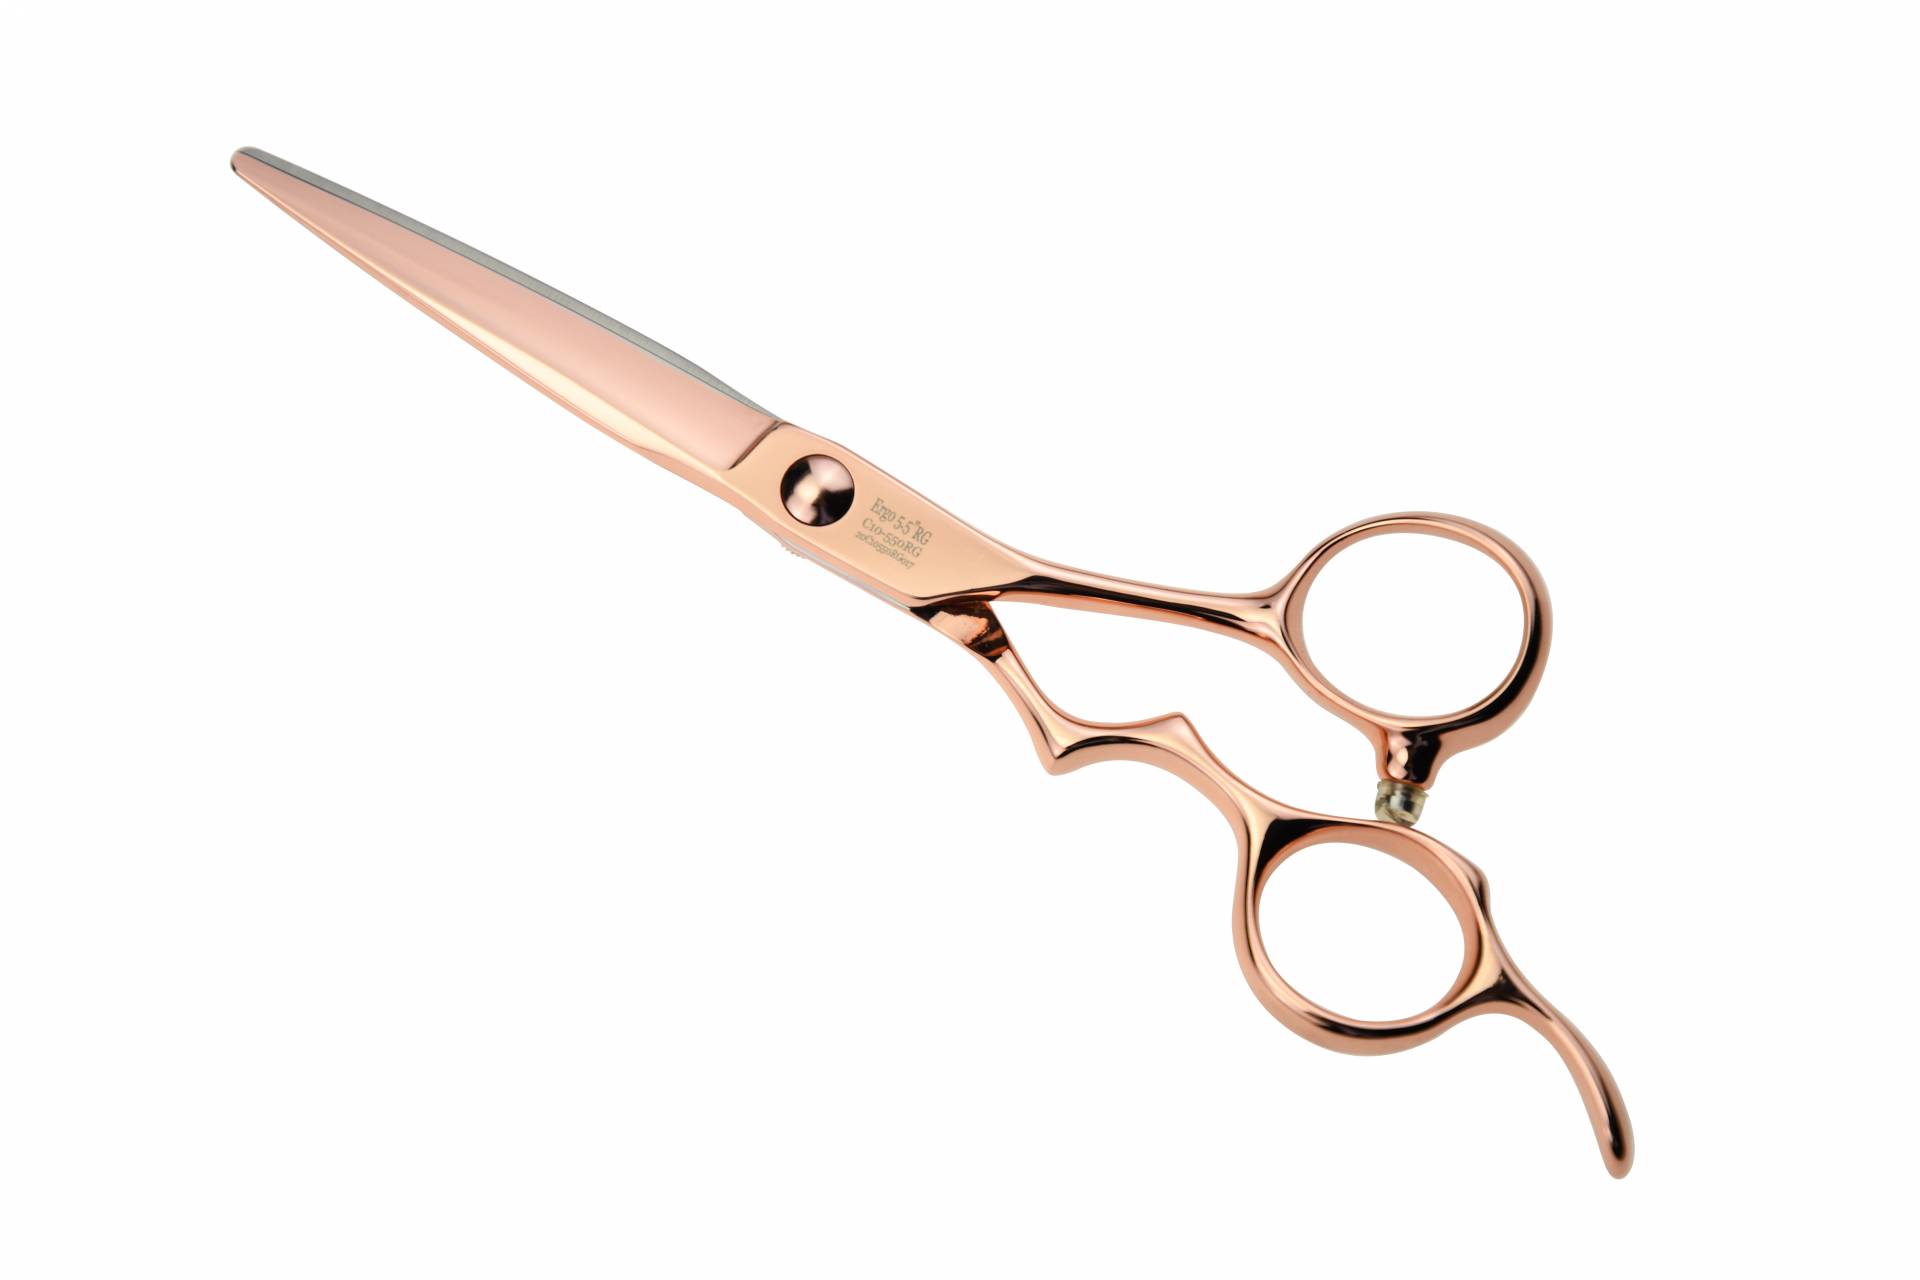 Above Ergo 30T Rose Gold Thinning Hair Cutting Shears - 6.0 (#21106030)